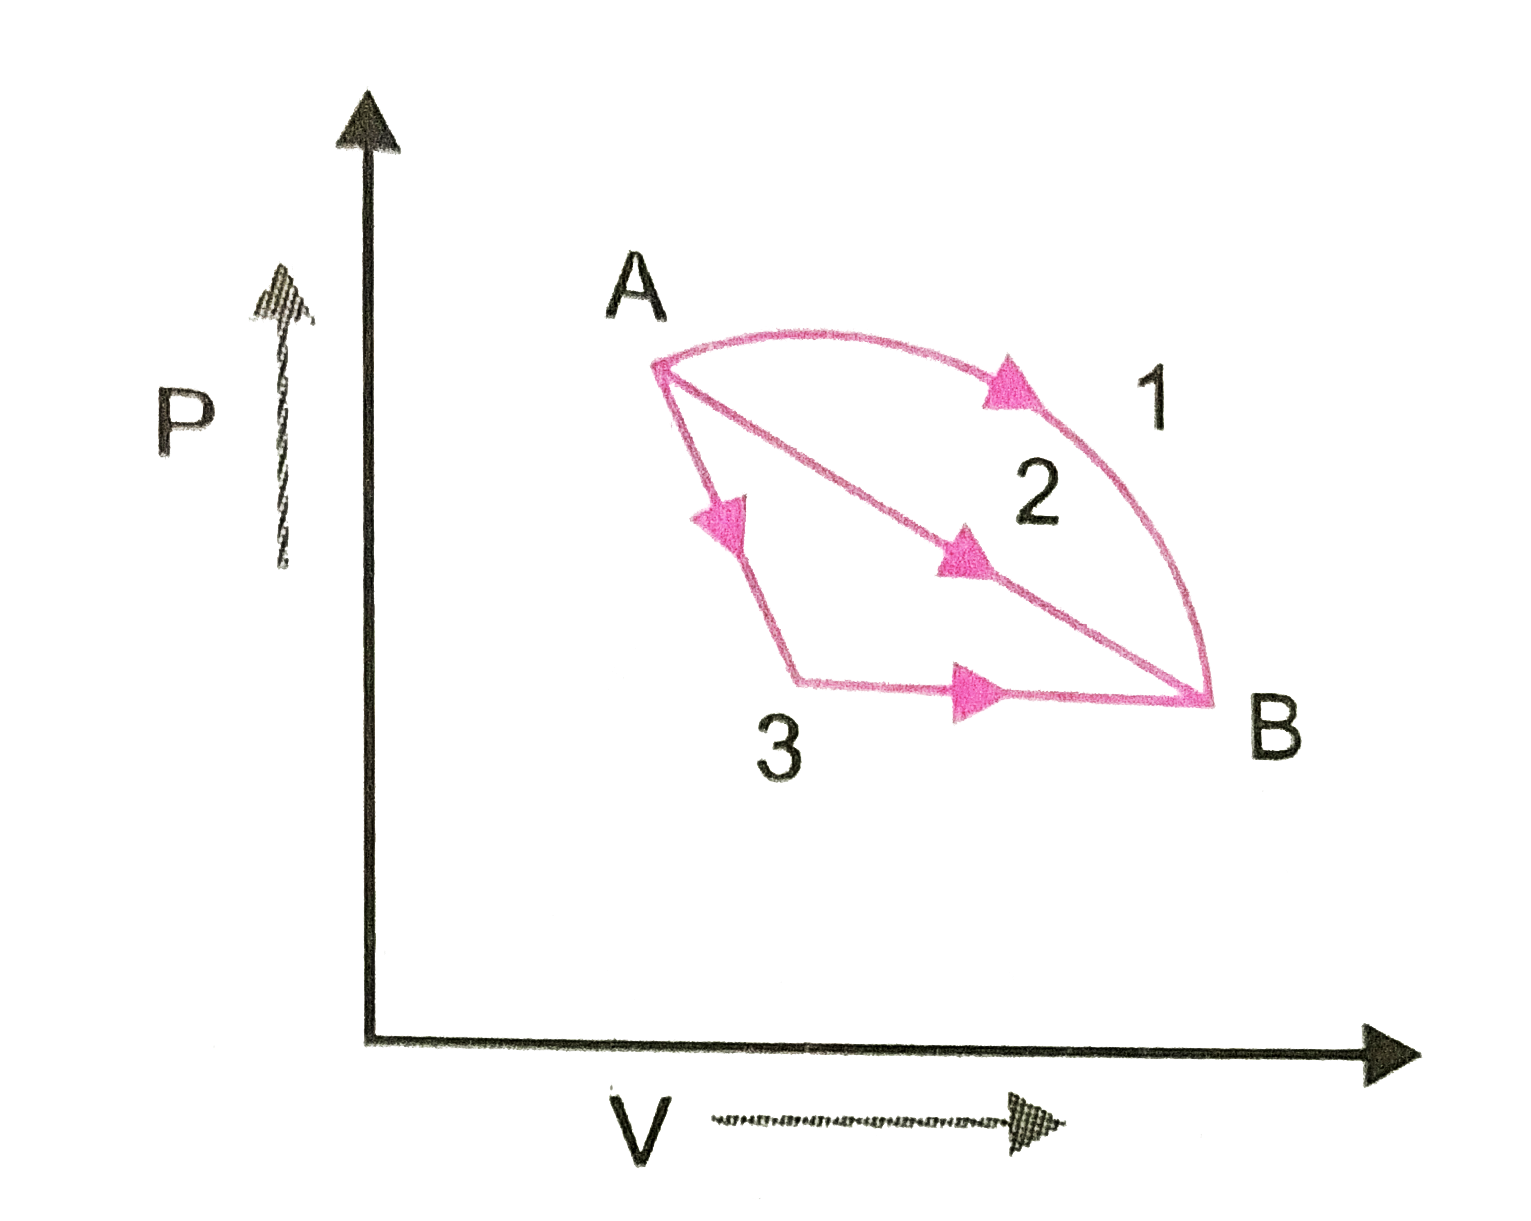 An ideal gas goes from State A to state B via three different process as indicate in the P-V diagram.      If Q(2), Q(3) indicates the heat absorbed by the gas along the three processes and DeltaU(1), DeltaU(2), DeltaU(3) indicates the change in internal energy along the three processes respectively, then